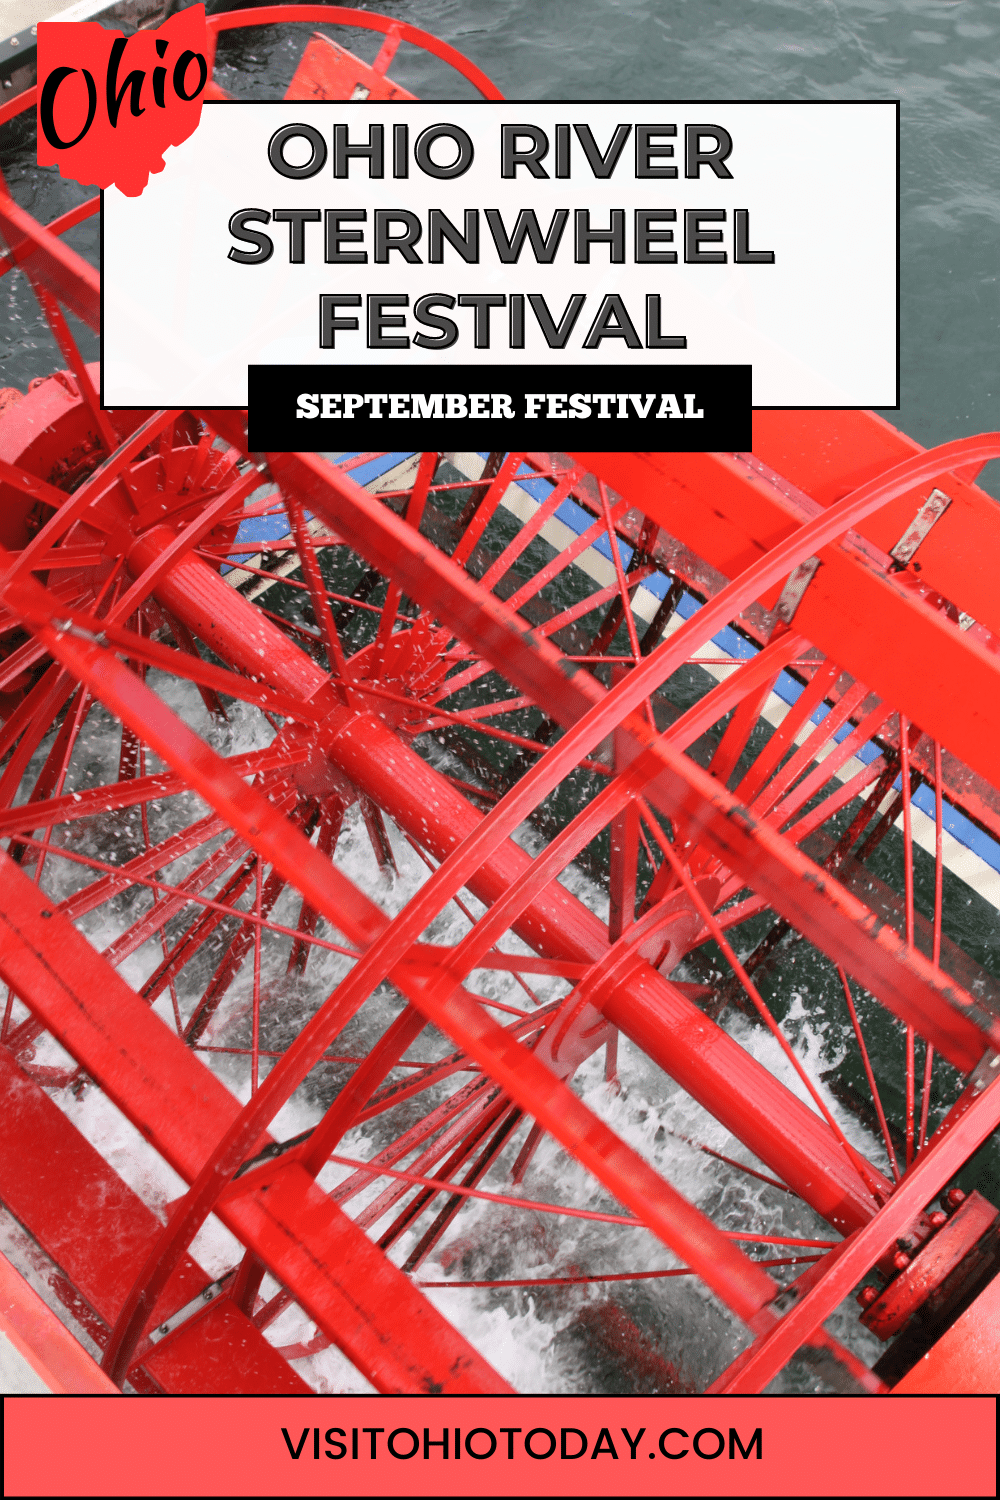 The Ohio River Sternwheel Festival is an annual event that takes place on the weekend after Labor Day. This festival is held in Marietta, along the levee, and features more than 35 sternwheelers docked along the waterfront.